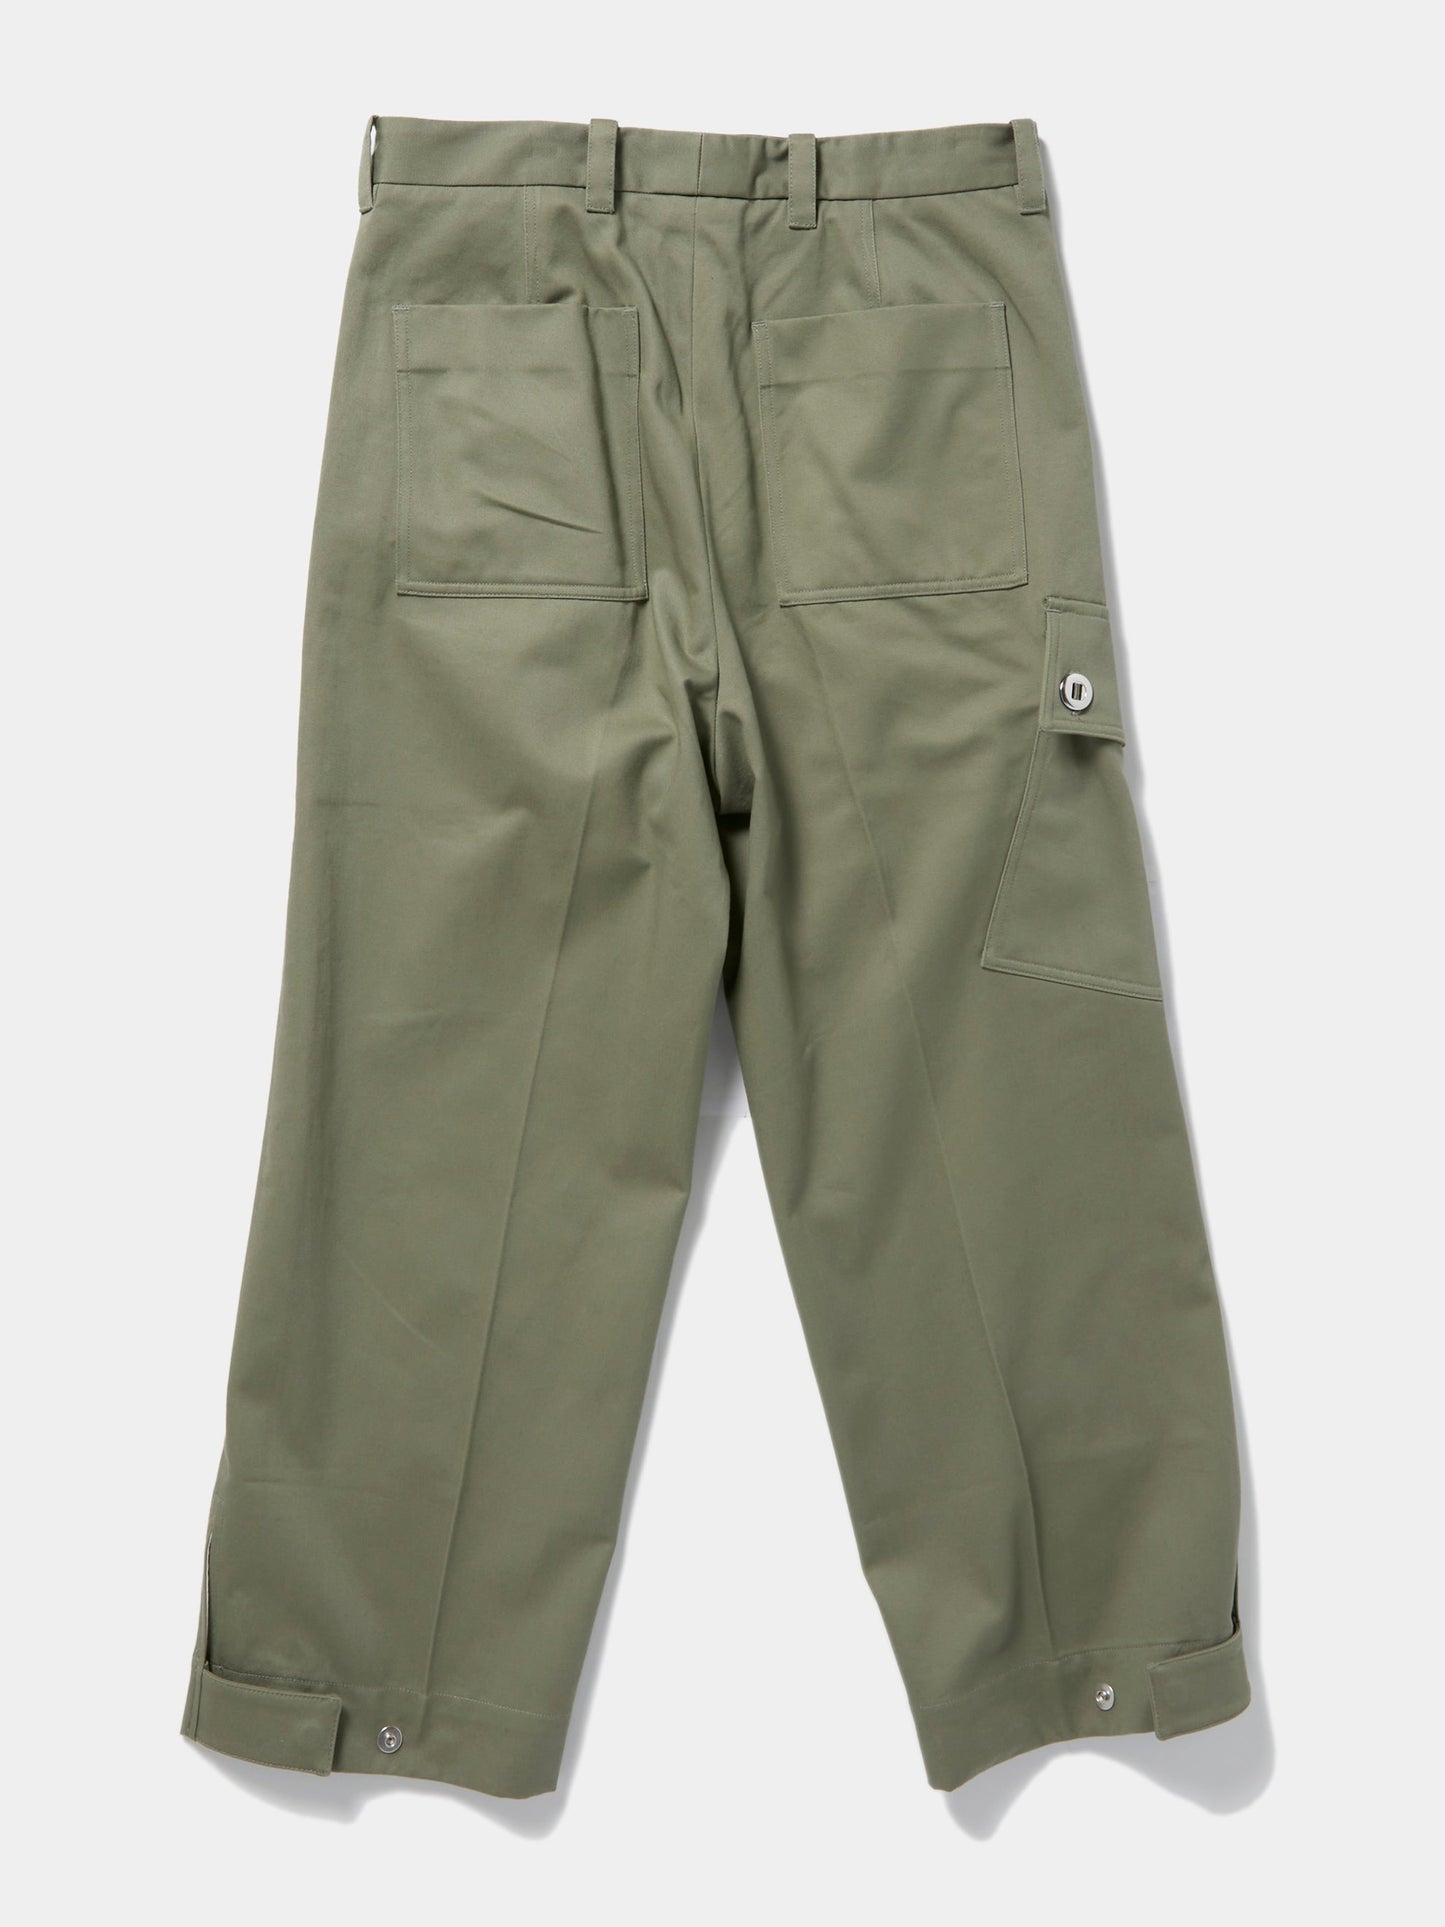 COMBINE PANT (Olive Green)